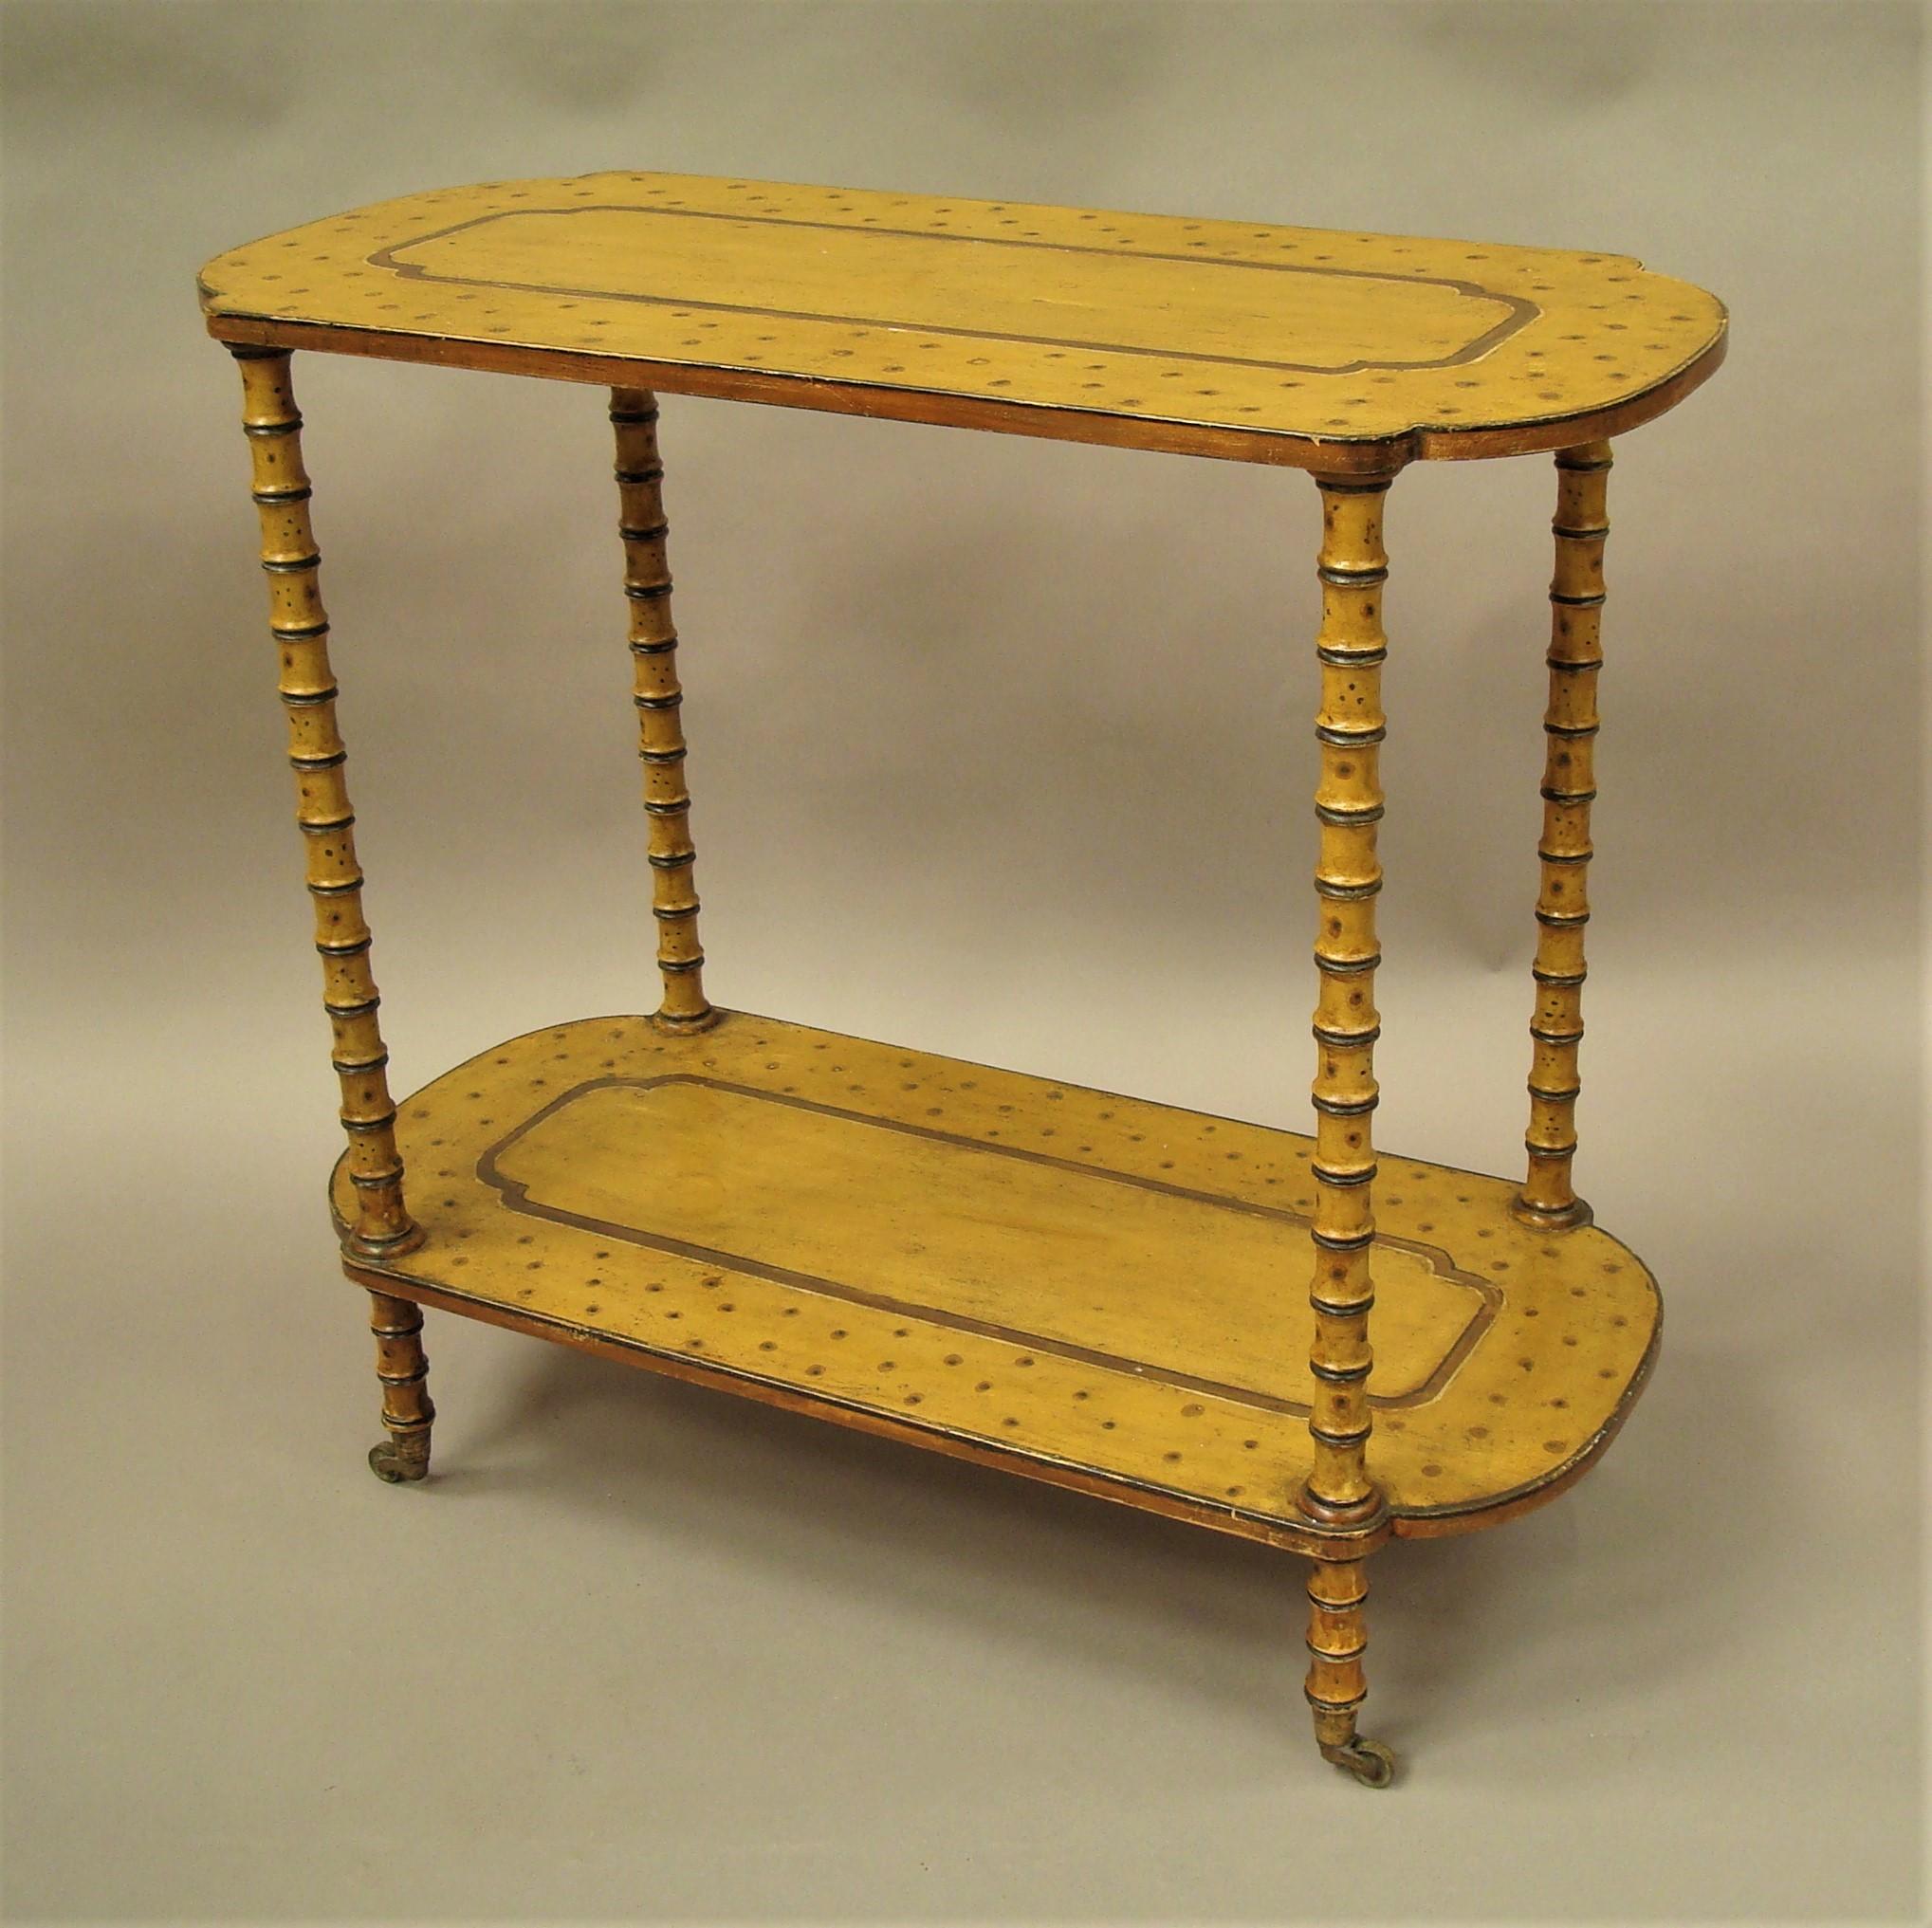 Unusual Regency painted faux bamboo centre or occasional table; in the Brighton Pavilion style decorated on a yellow ochre background; the rectangular top with re-entrant corners and bow ends with a plain central panel and a decorated border of